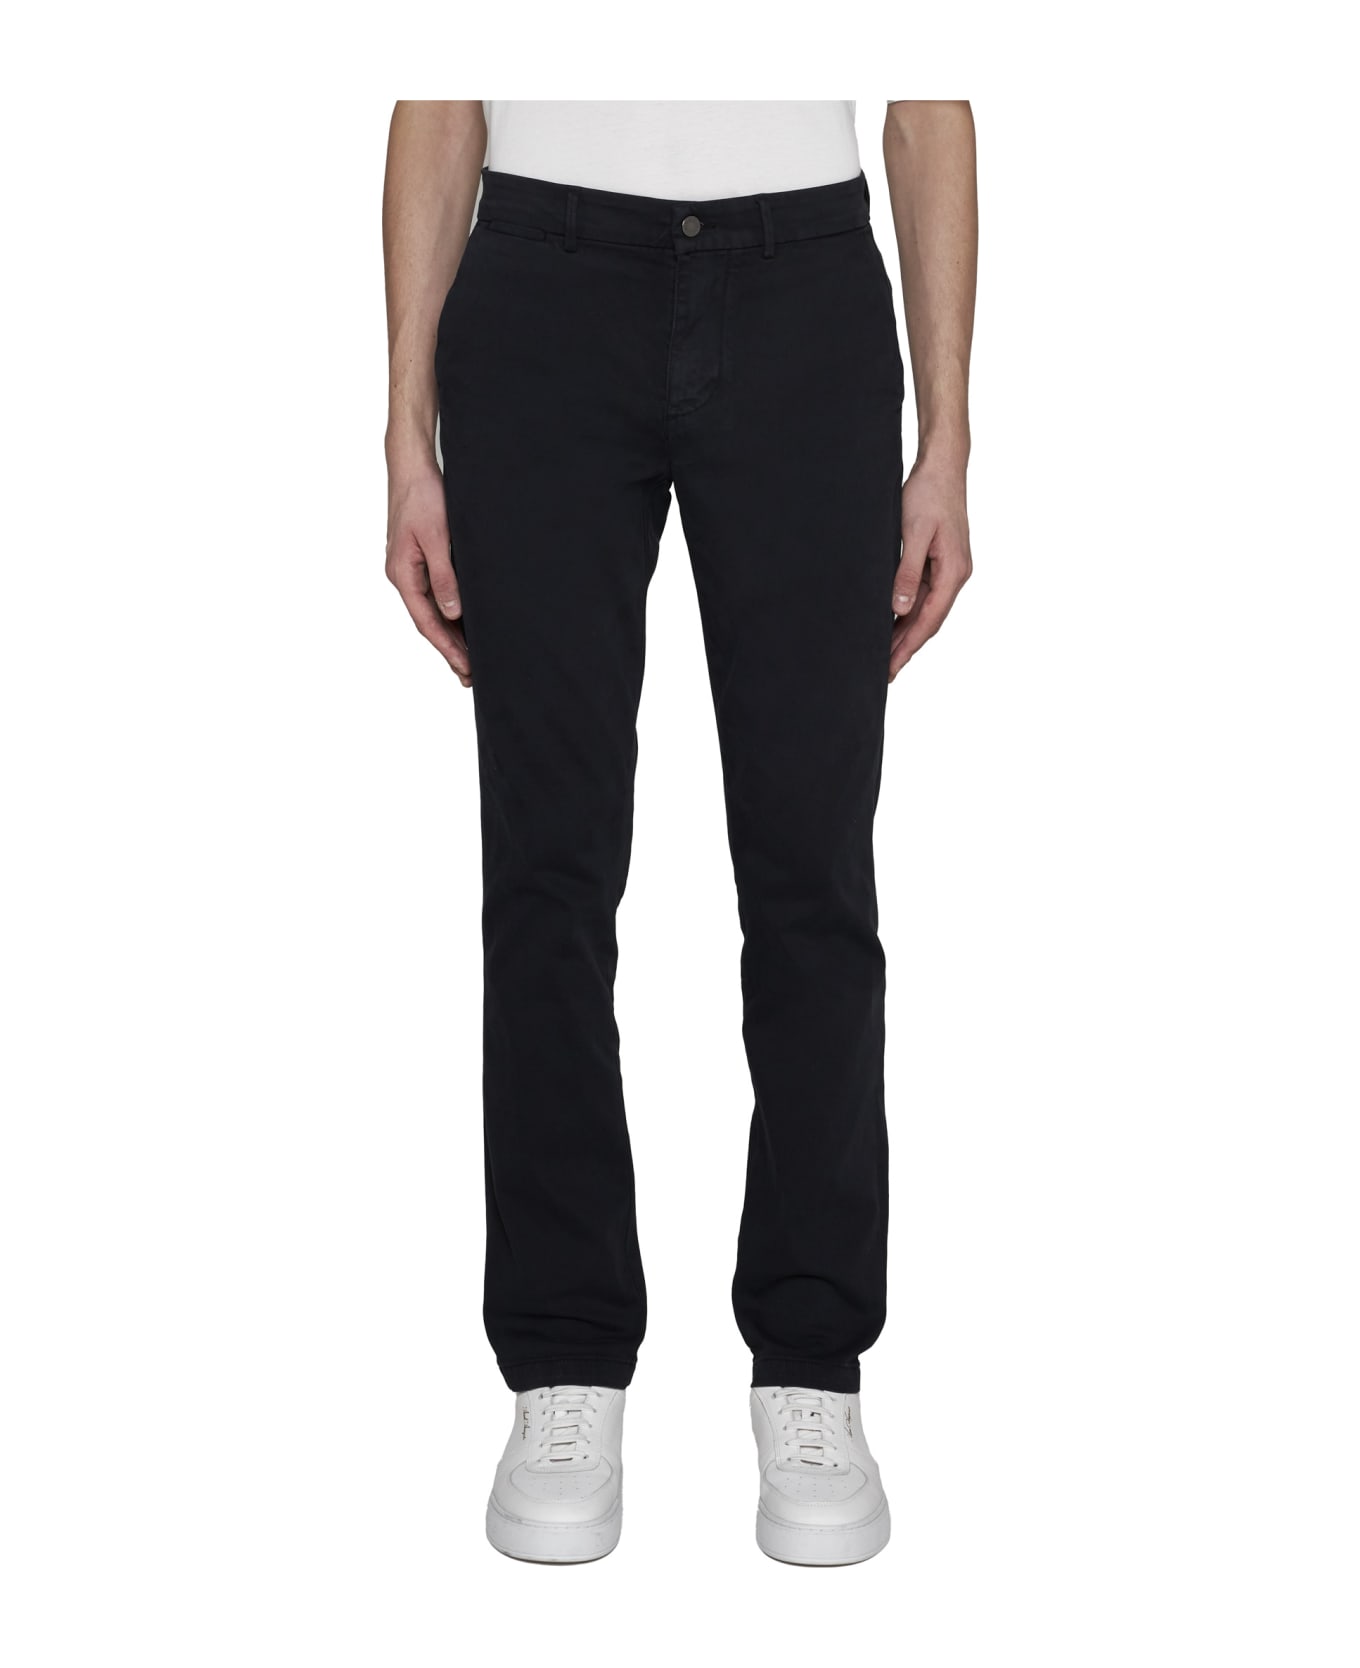 7 For All Mankind Pants - Black ボトムス